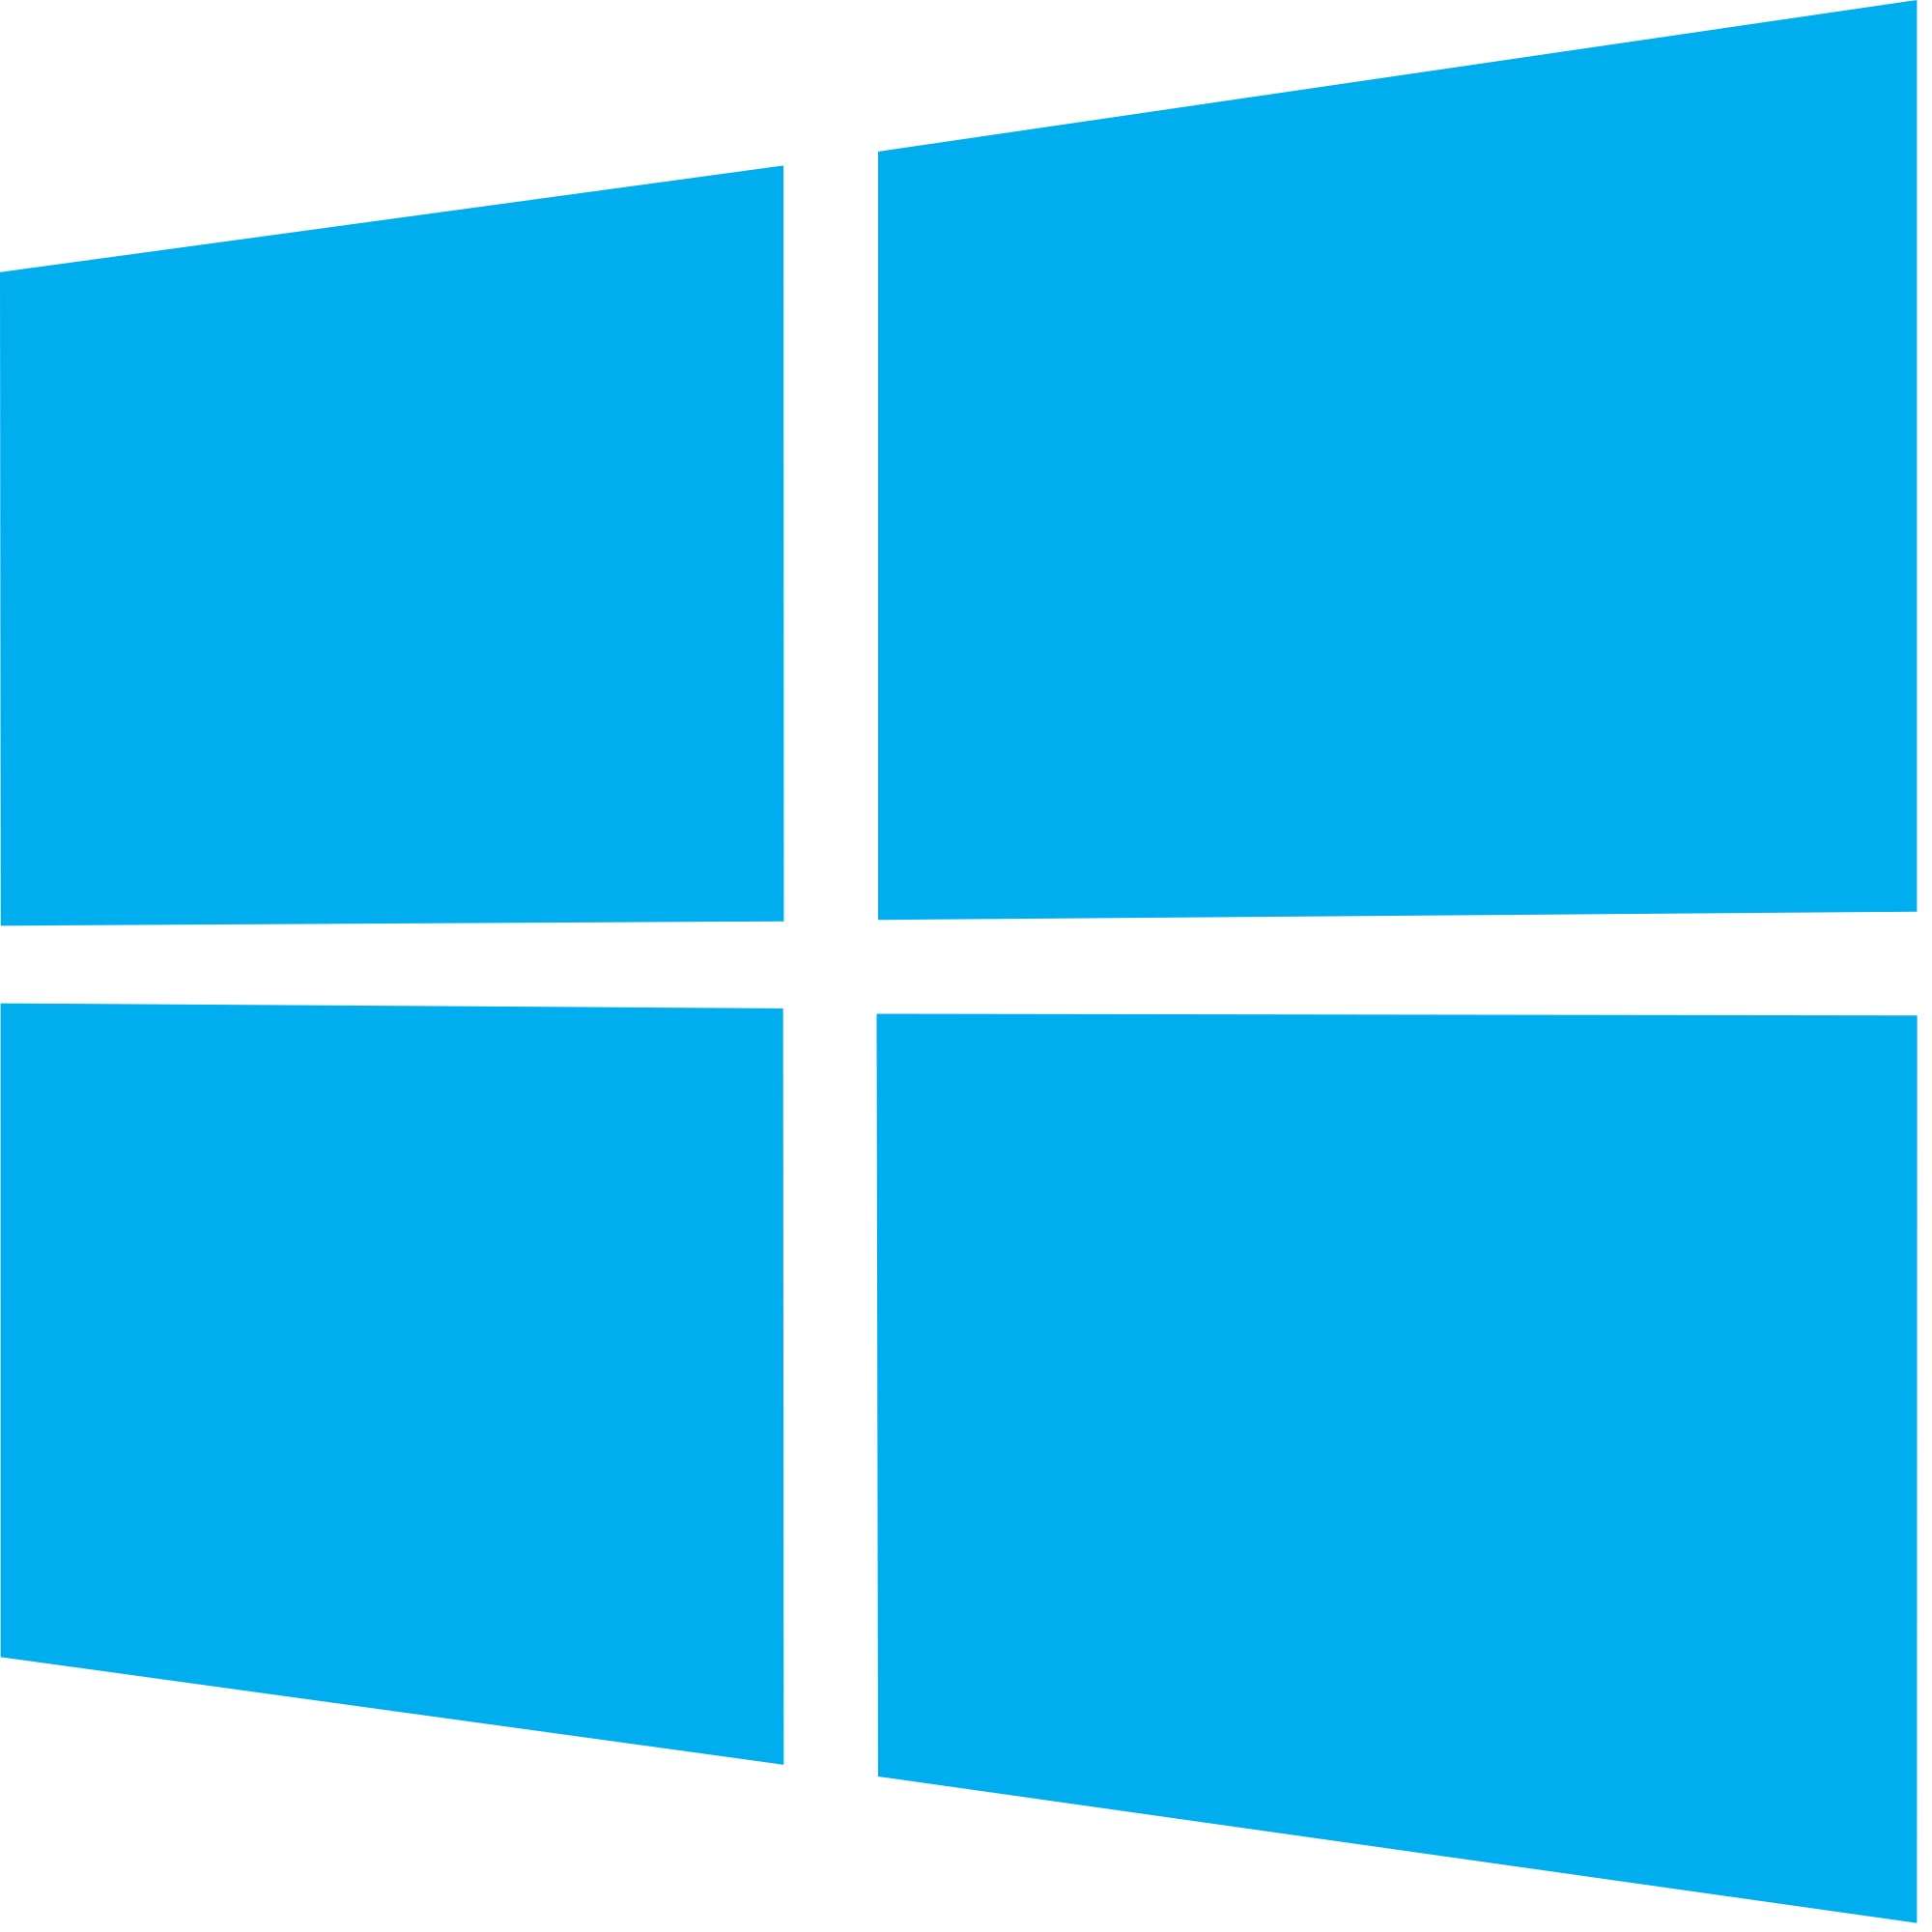 Check Out The New Microsoft Windows Logo Designed By Apple Cult Of Mac